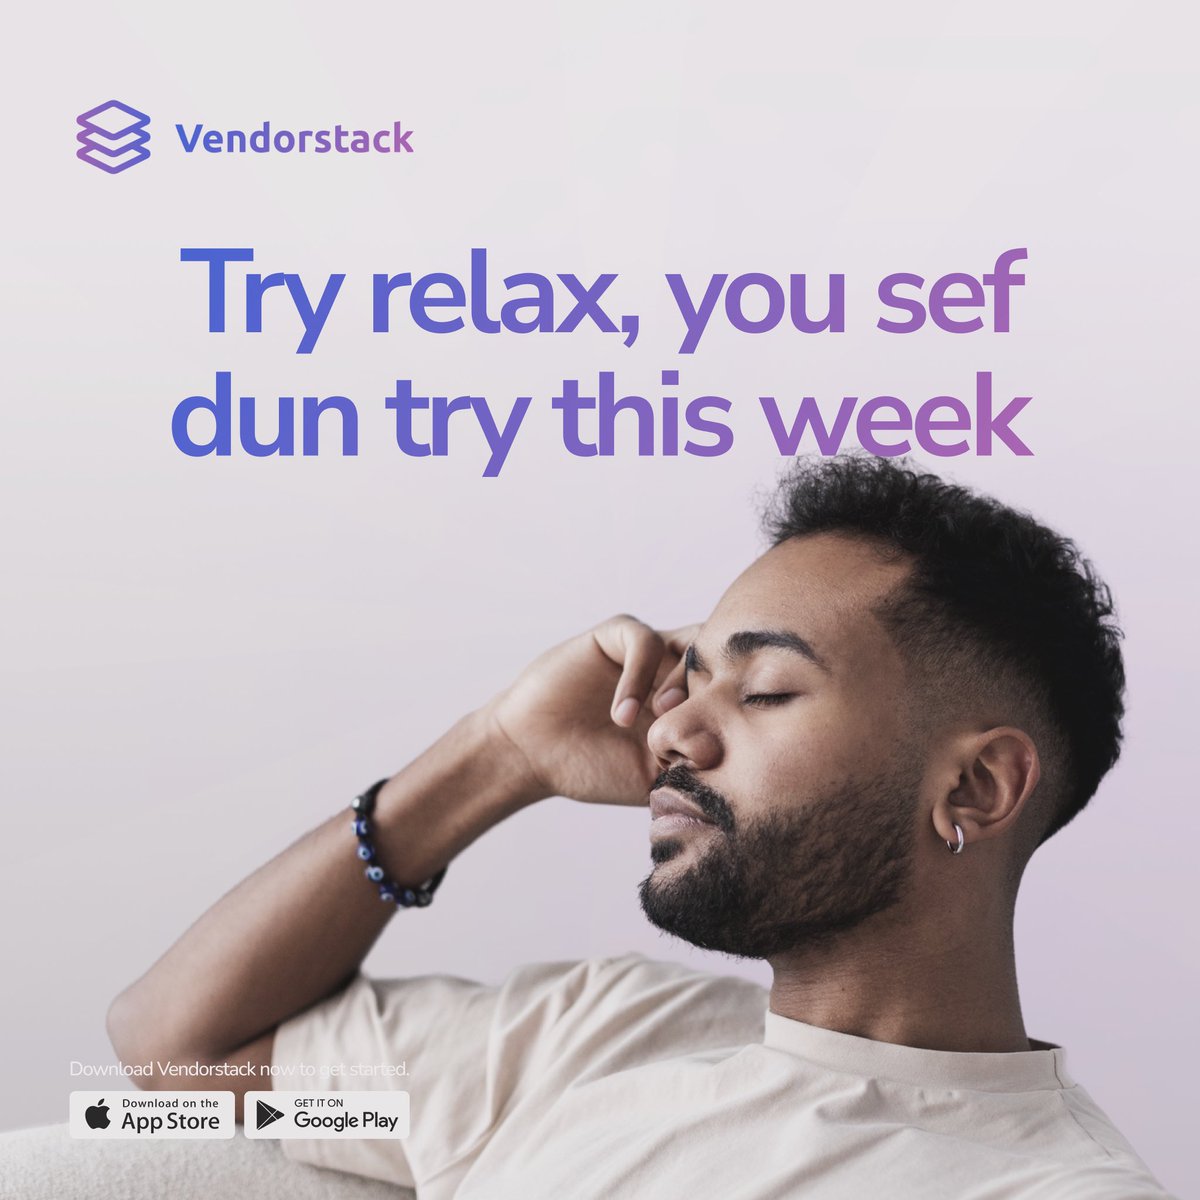 Dear business owner ✍️

The weekend is upon us, you’ve done the best you can do for this week, try rest make you get strength go again.

Signed
Your favorite social commerce platform 🤭

#weekend #FridayMood #socialcommerce #getvendorstack